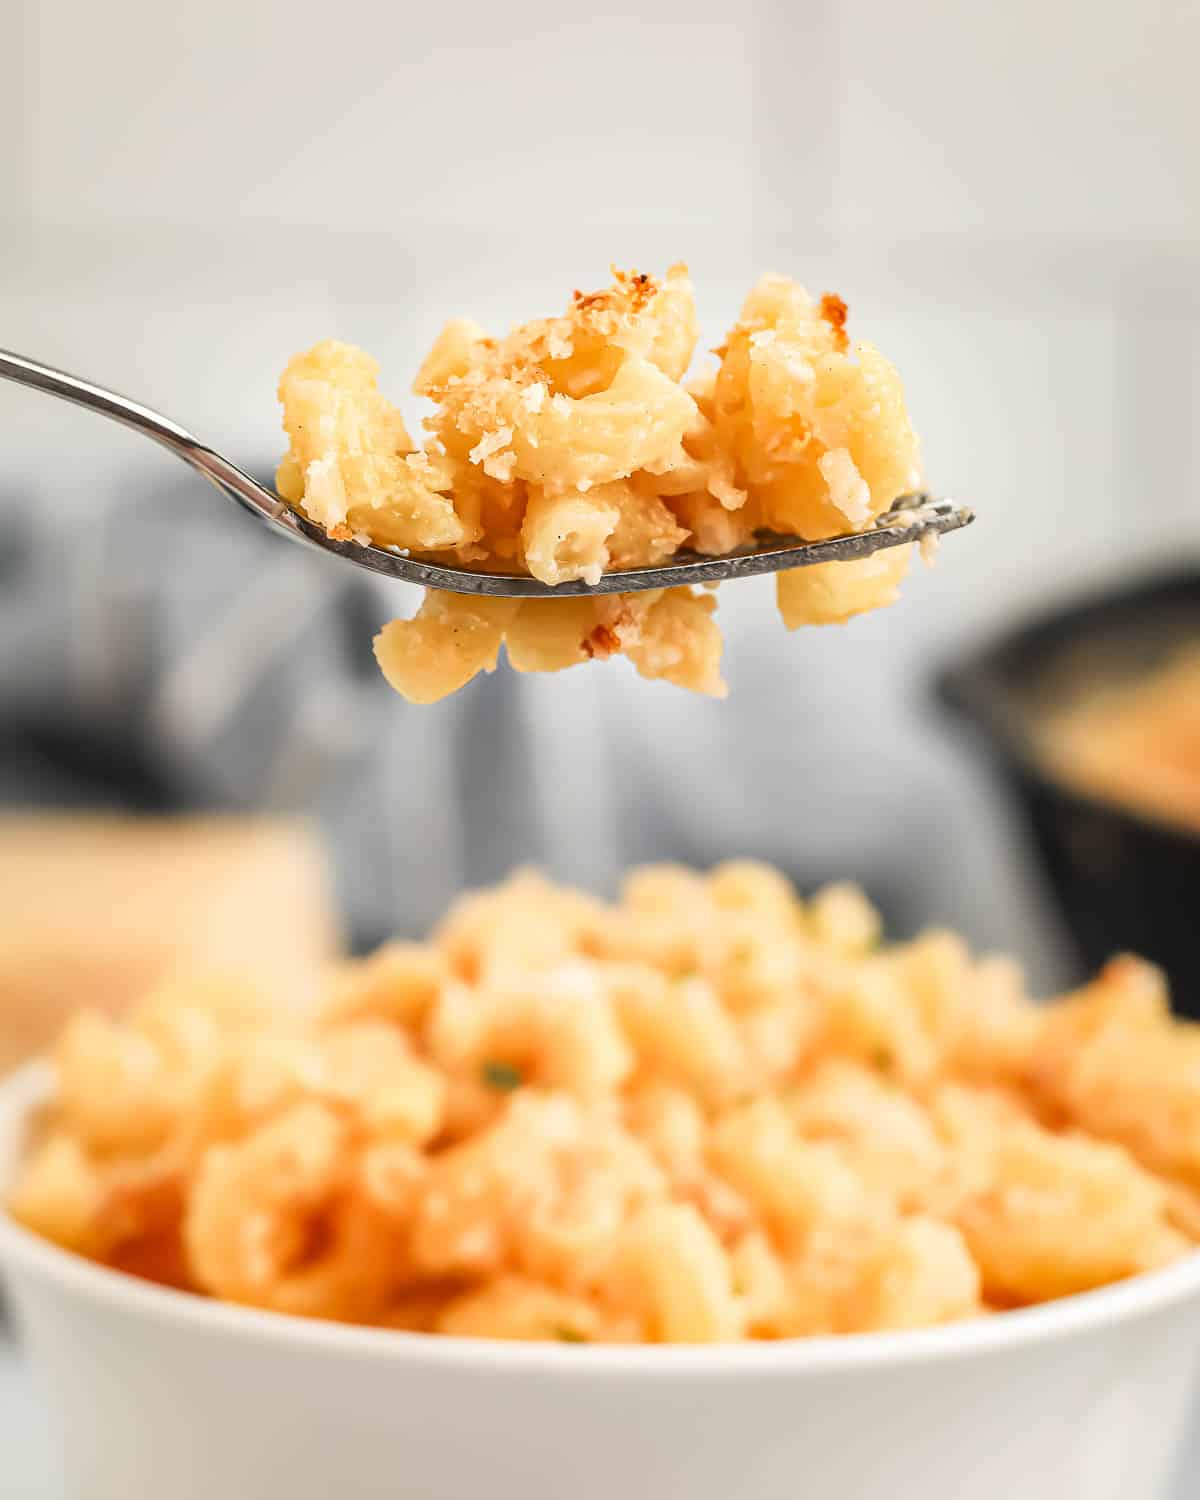 Side shot of a fork holding a bite of Mac and cheese with a white bowl of Mac and cheese in the background.